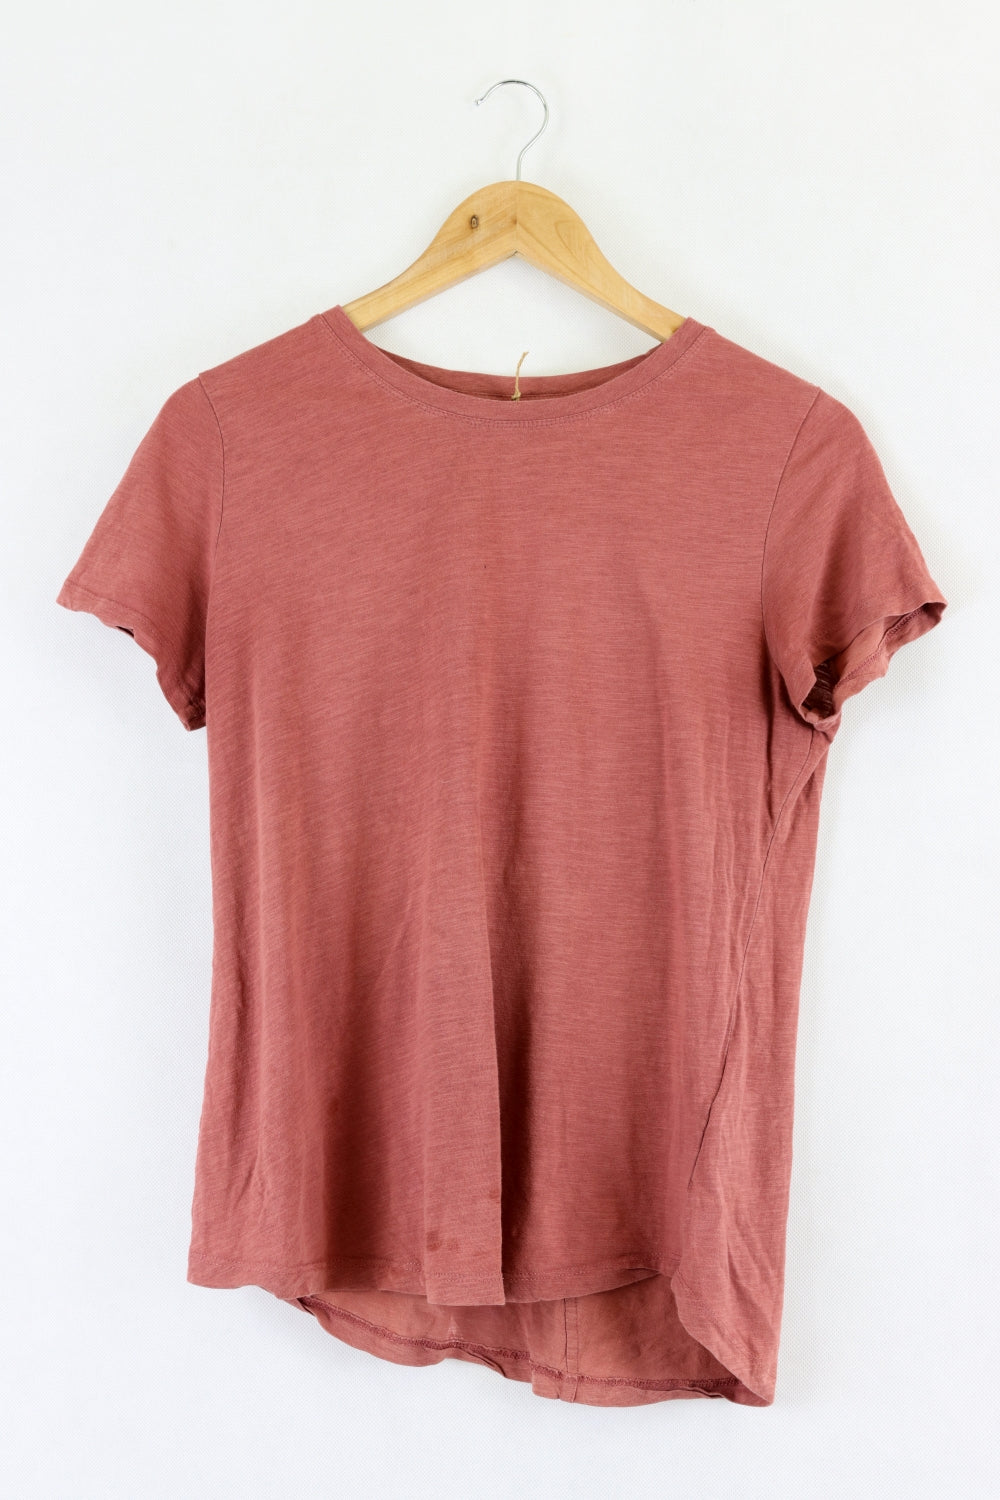 Just Jeans Pink T-Shirt XS